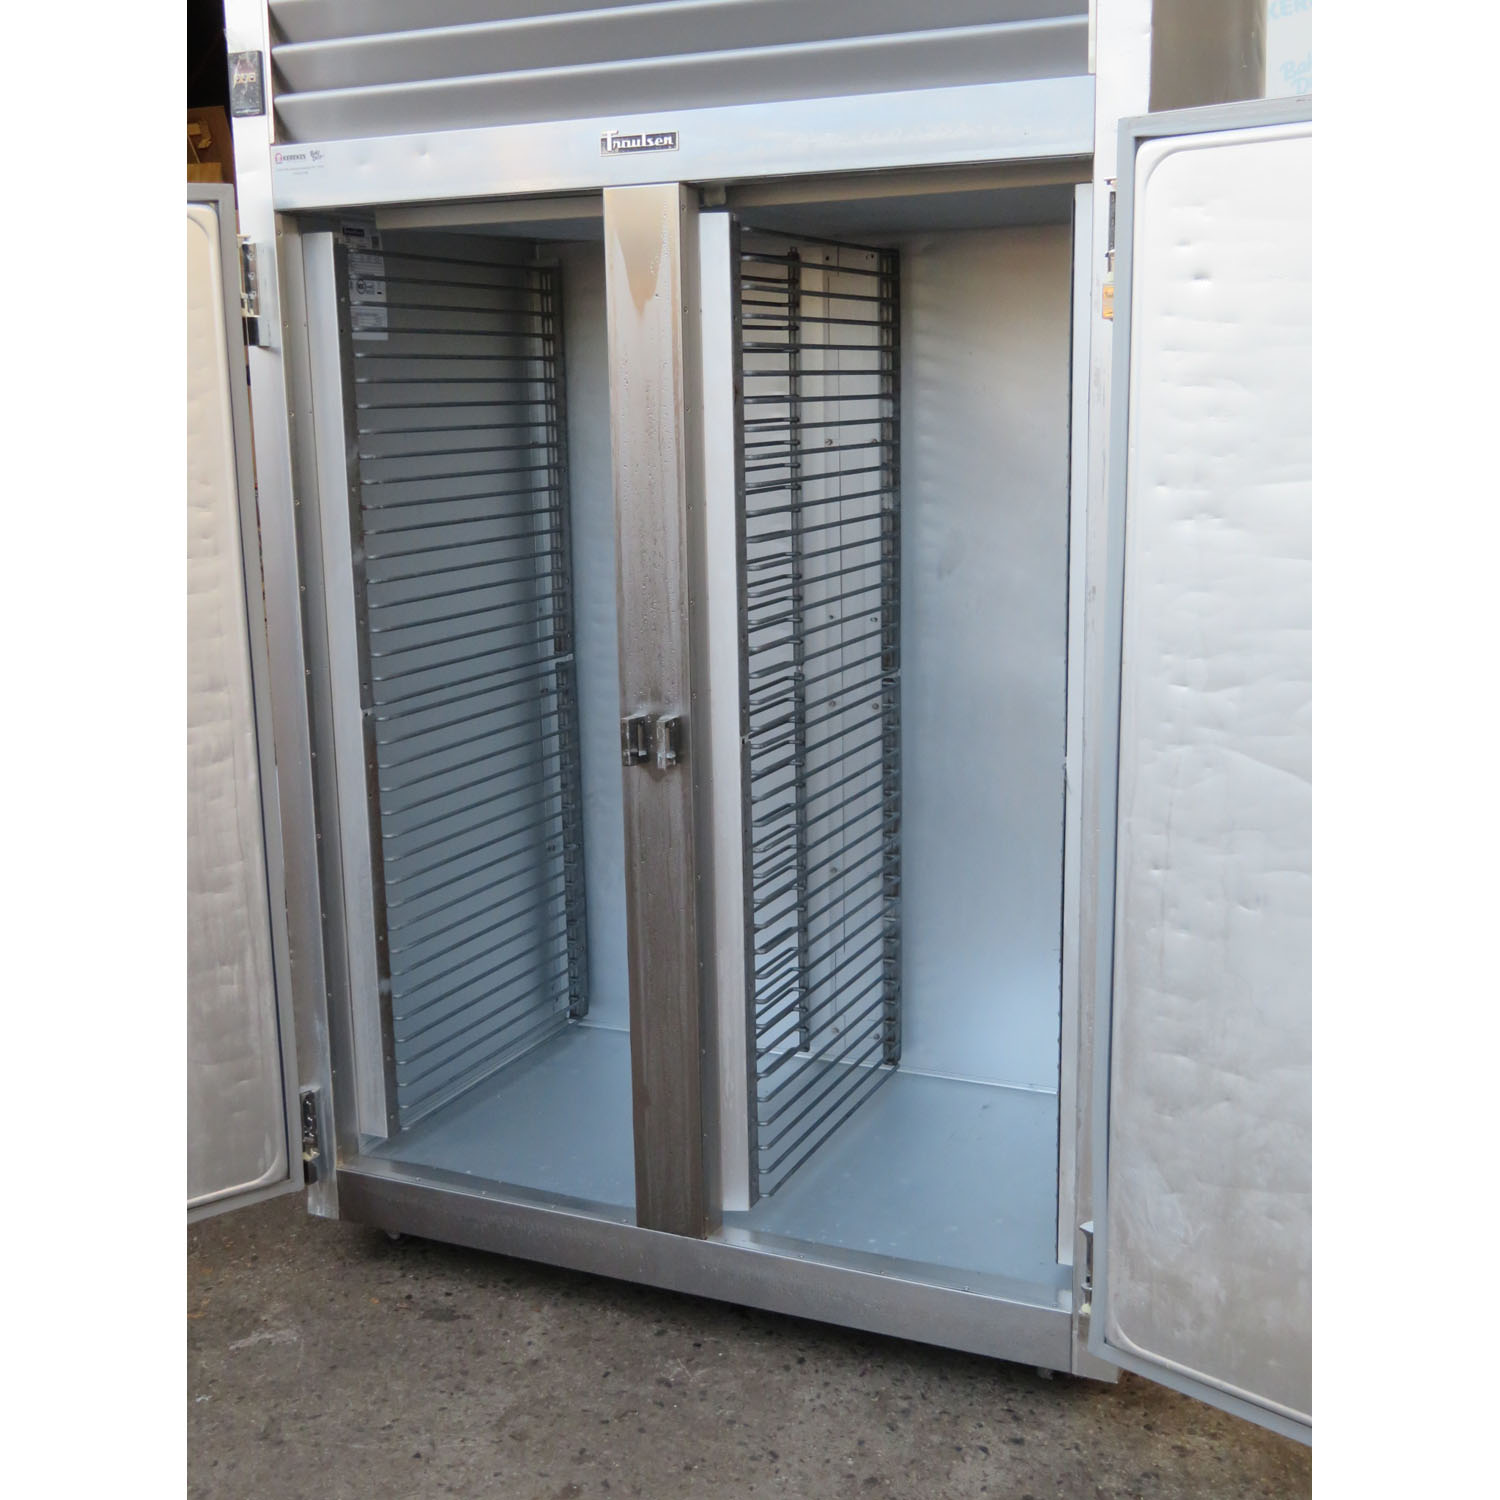 Traulsen G22010 Freezer, Used Very Good Condition image 2